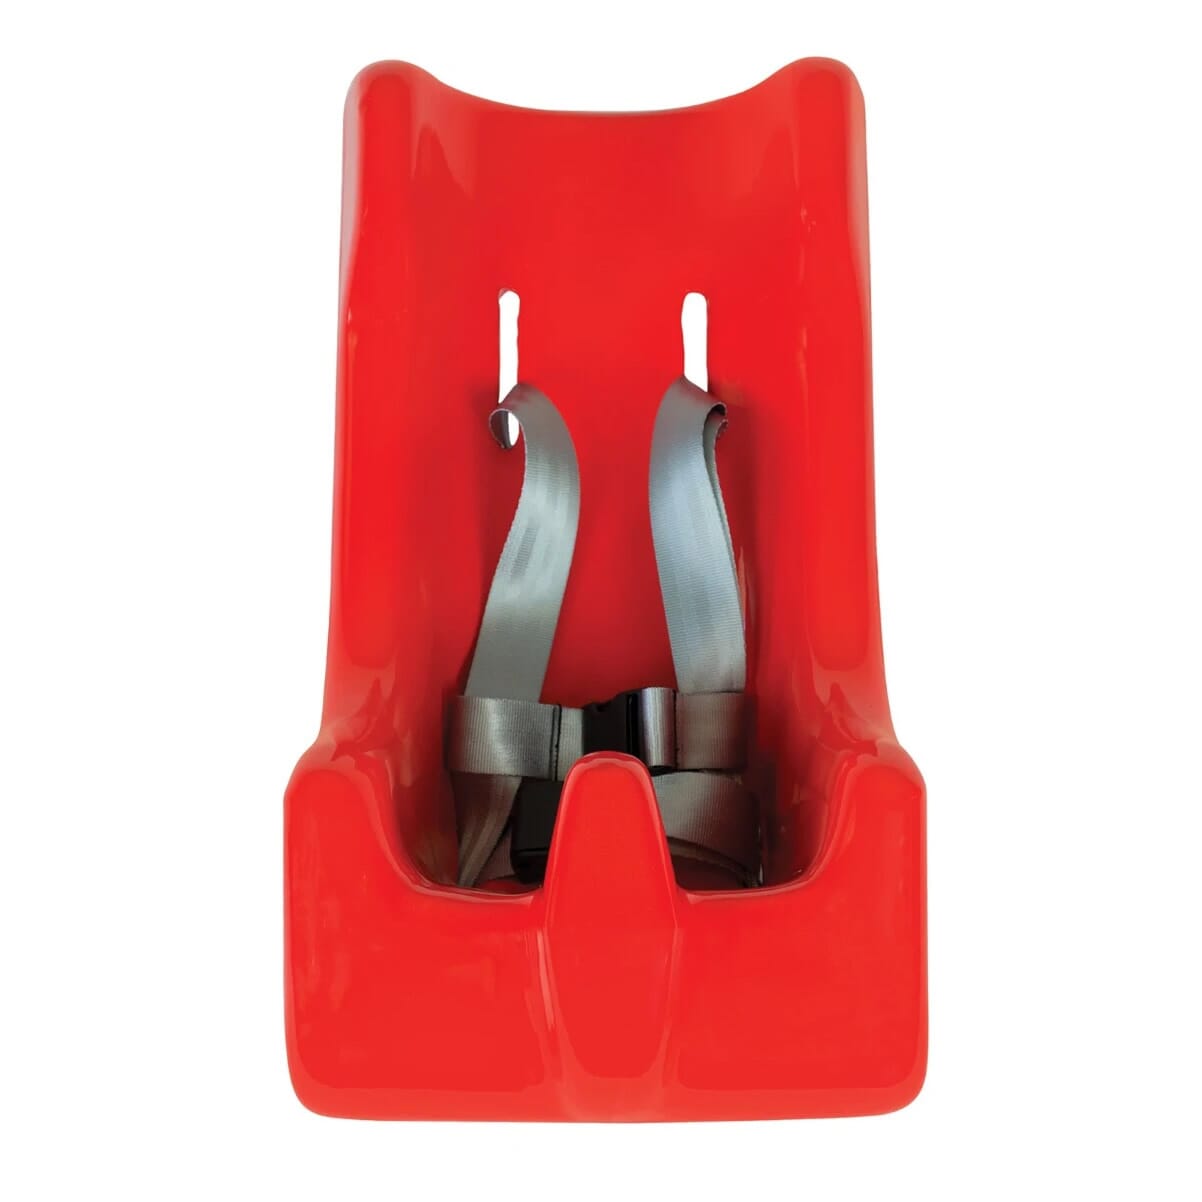 View Tumble Forms Feeder Seat Red Small information